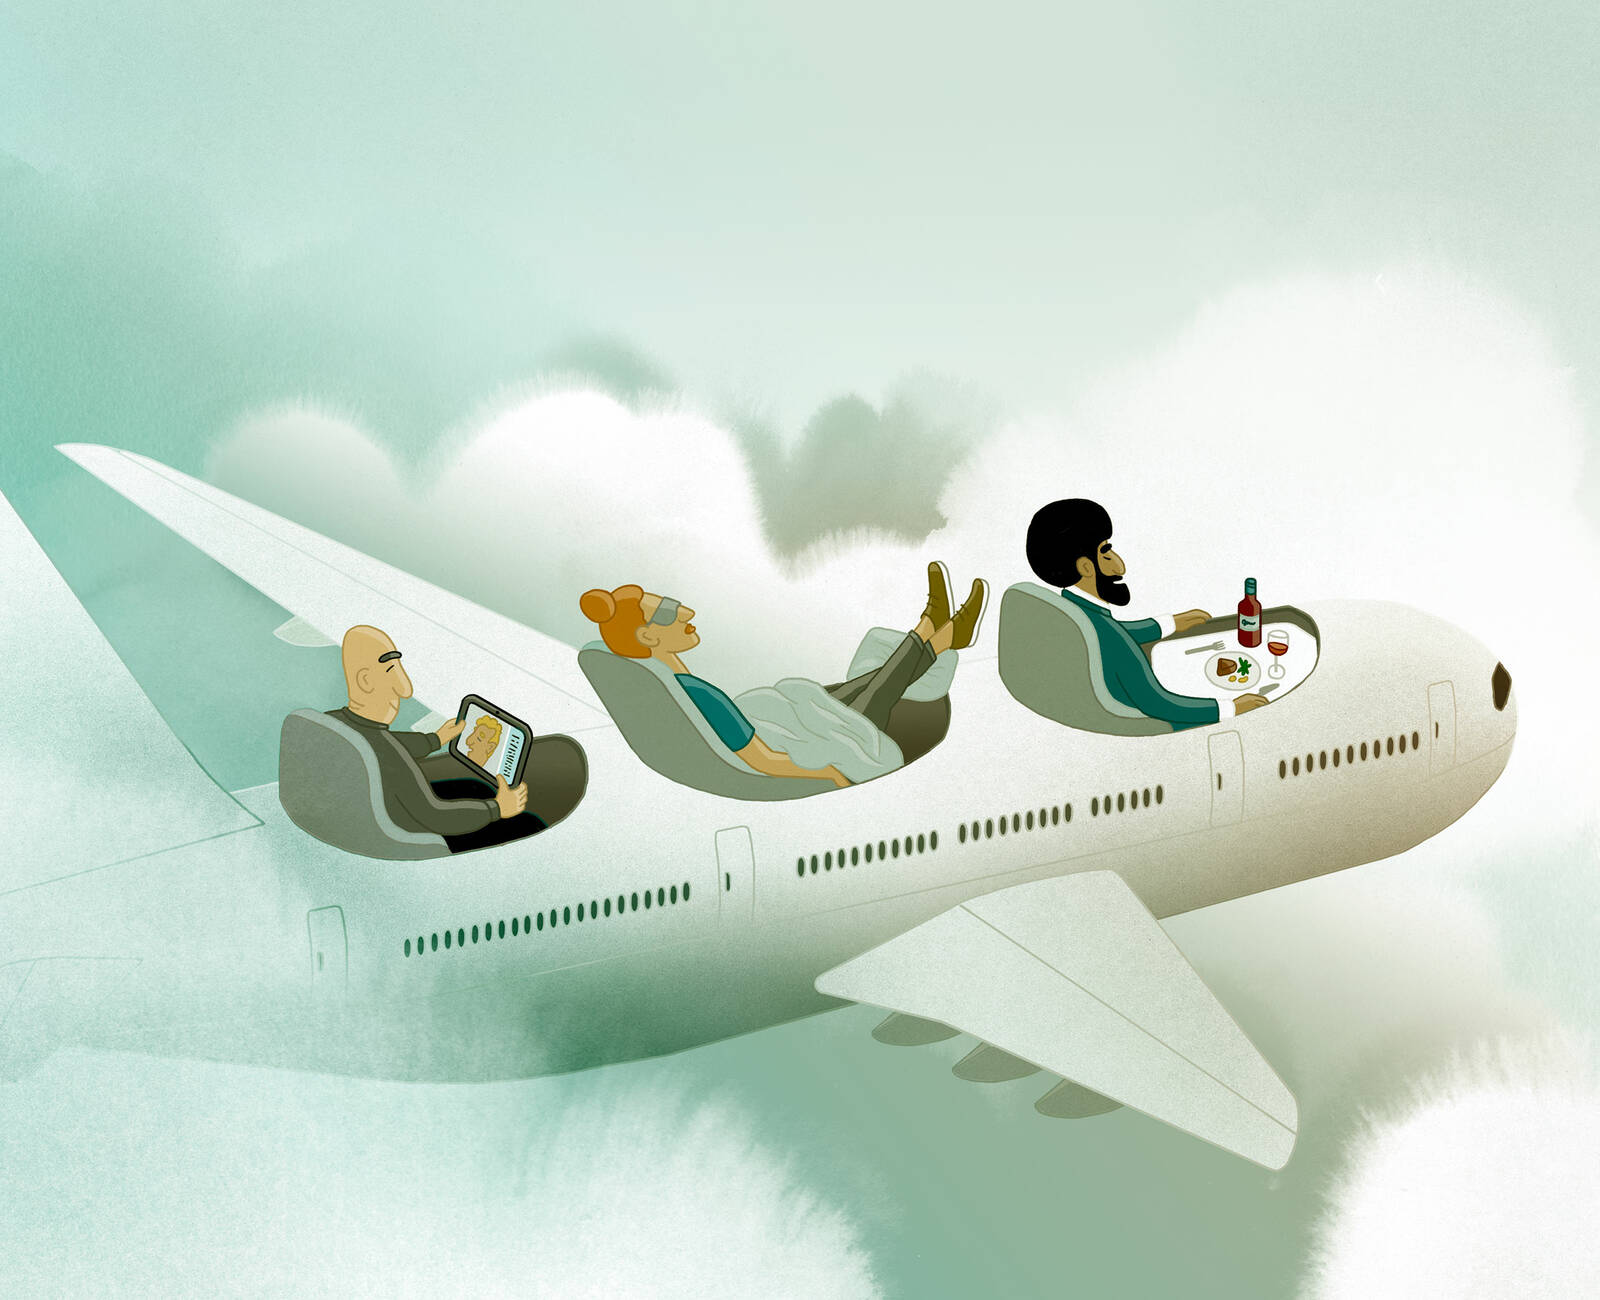 Airline passengers have individualized flying experiences.